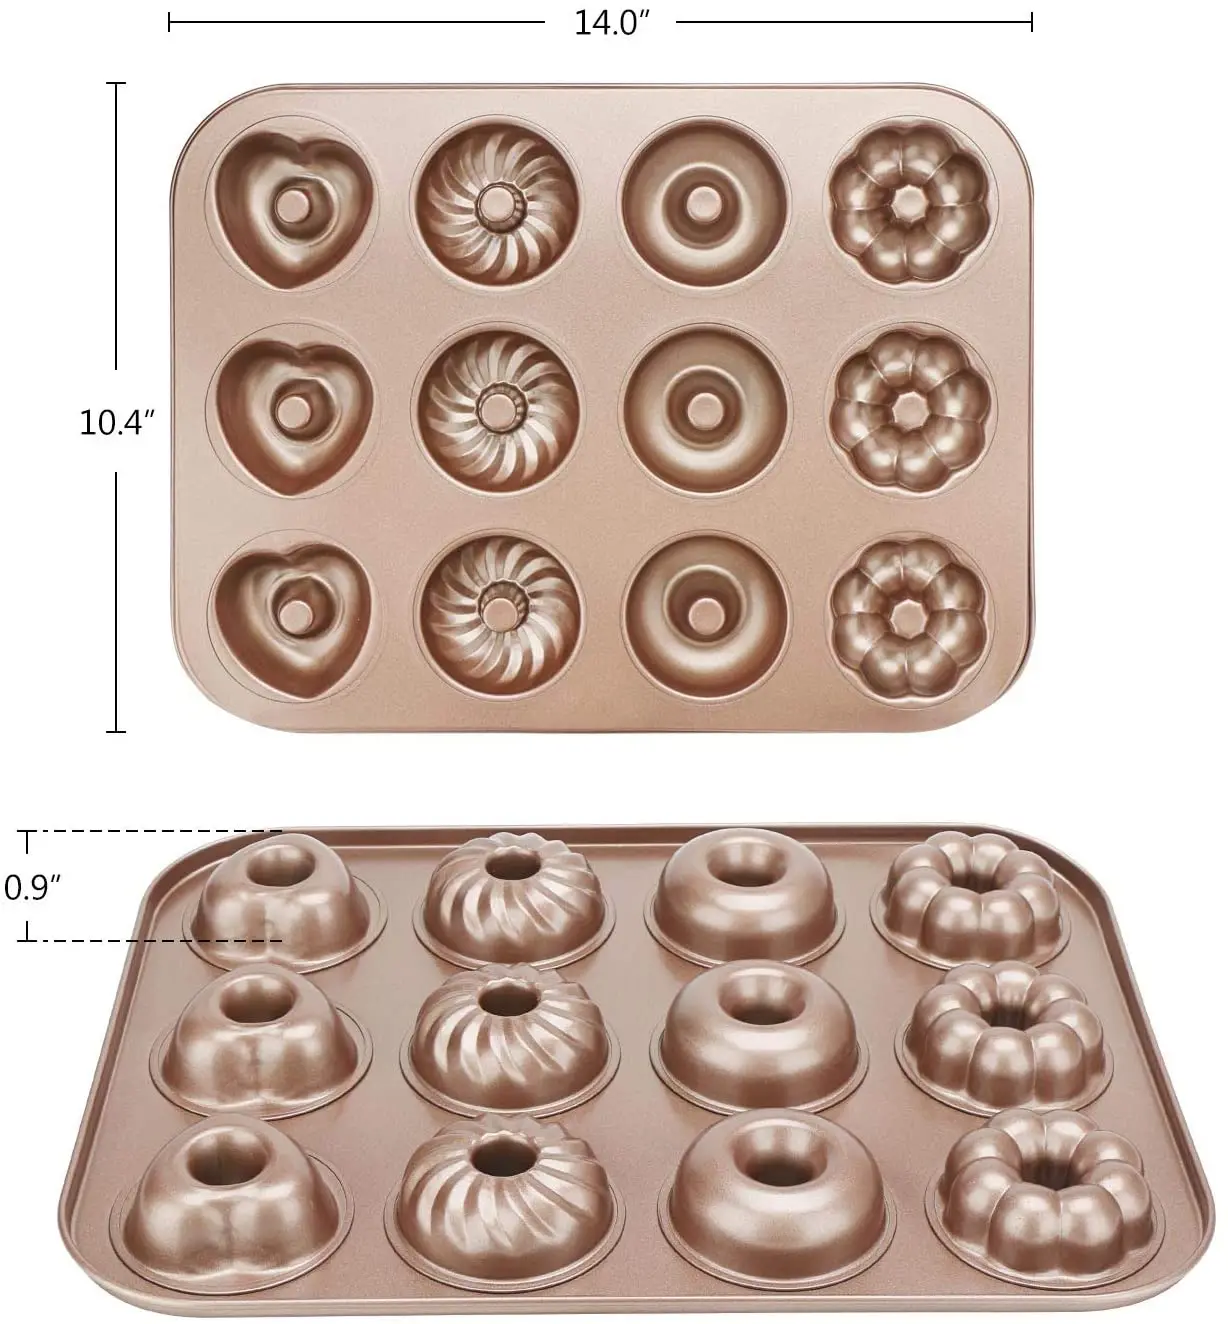 12-Cavity Non-Stick Pattern Doughnut Bakeware,Carbon Steel Donut Mold for Oven Baking Queentres Donut Mold Cake Pan 